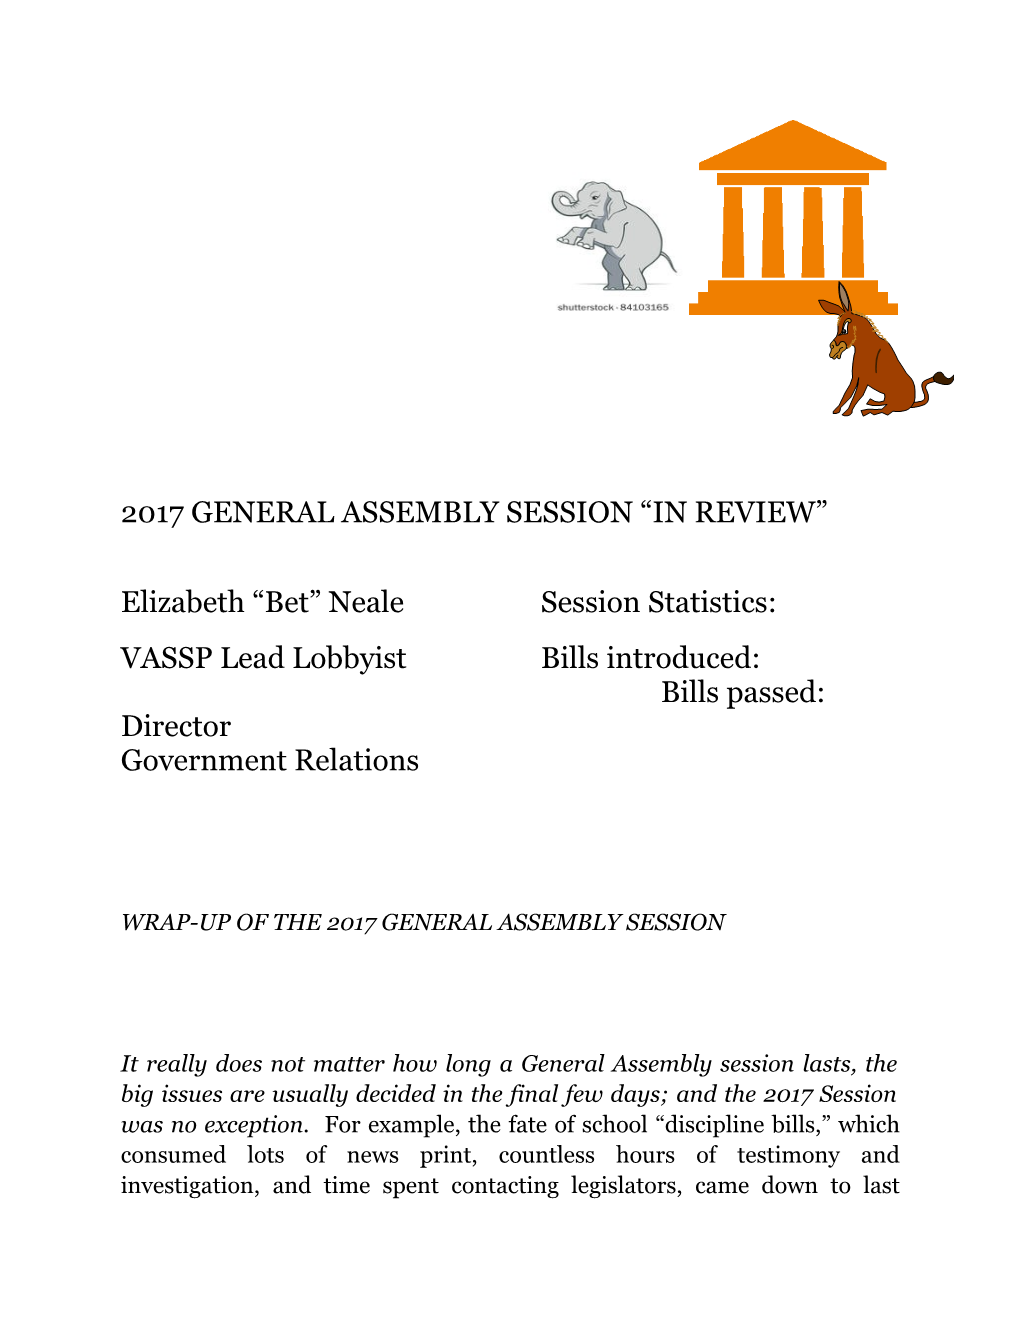 2017 General Assembly Session in Review